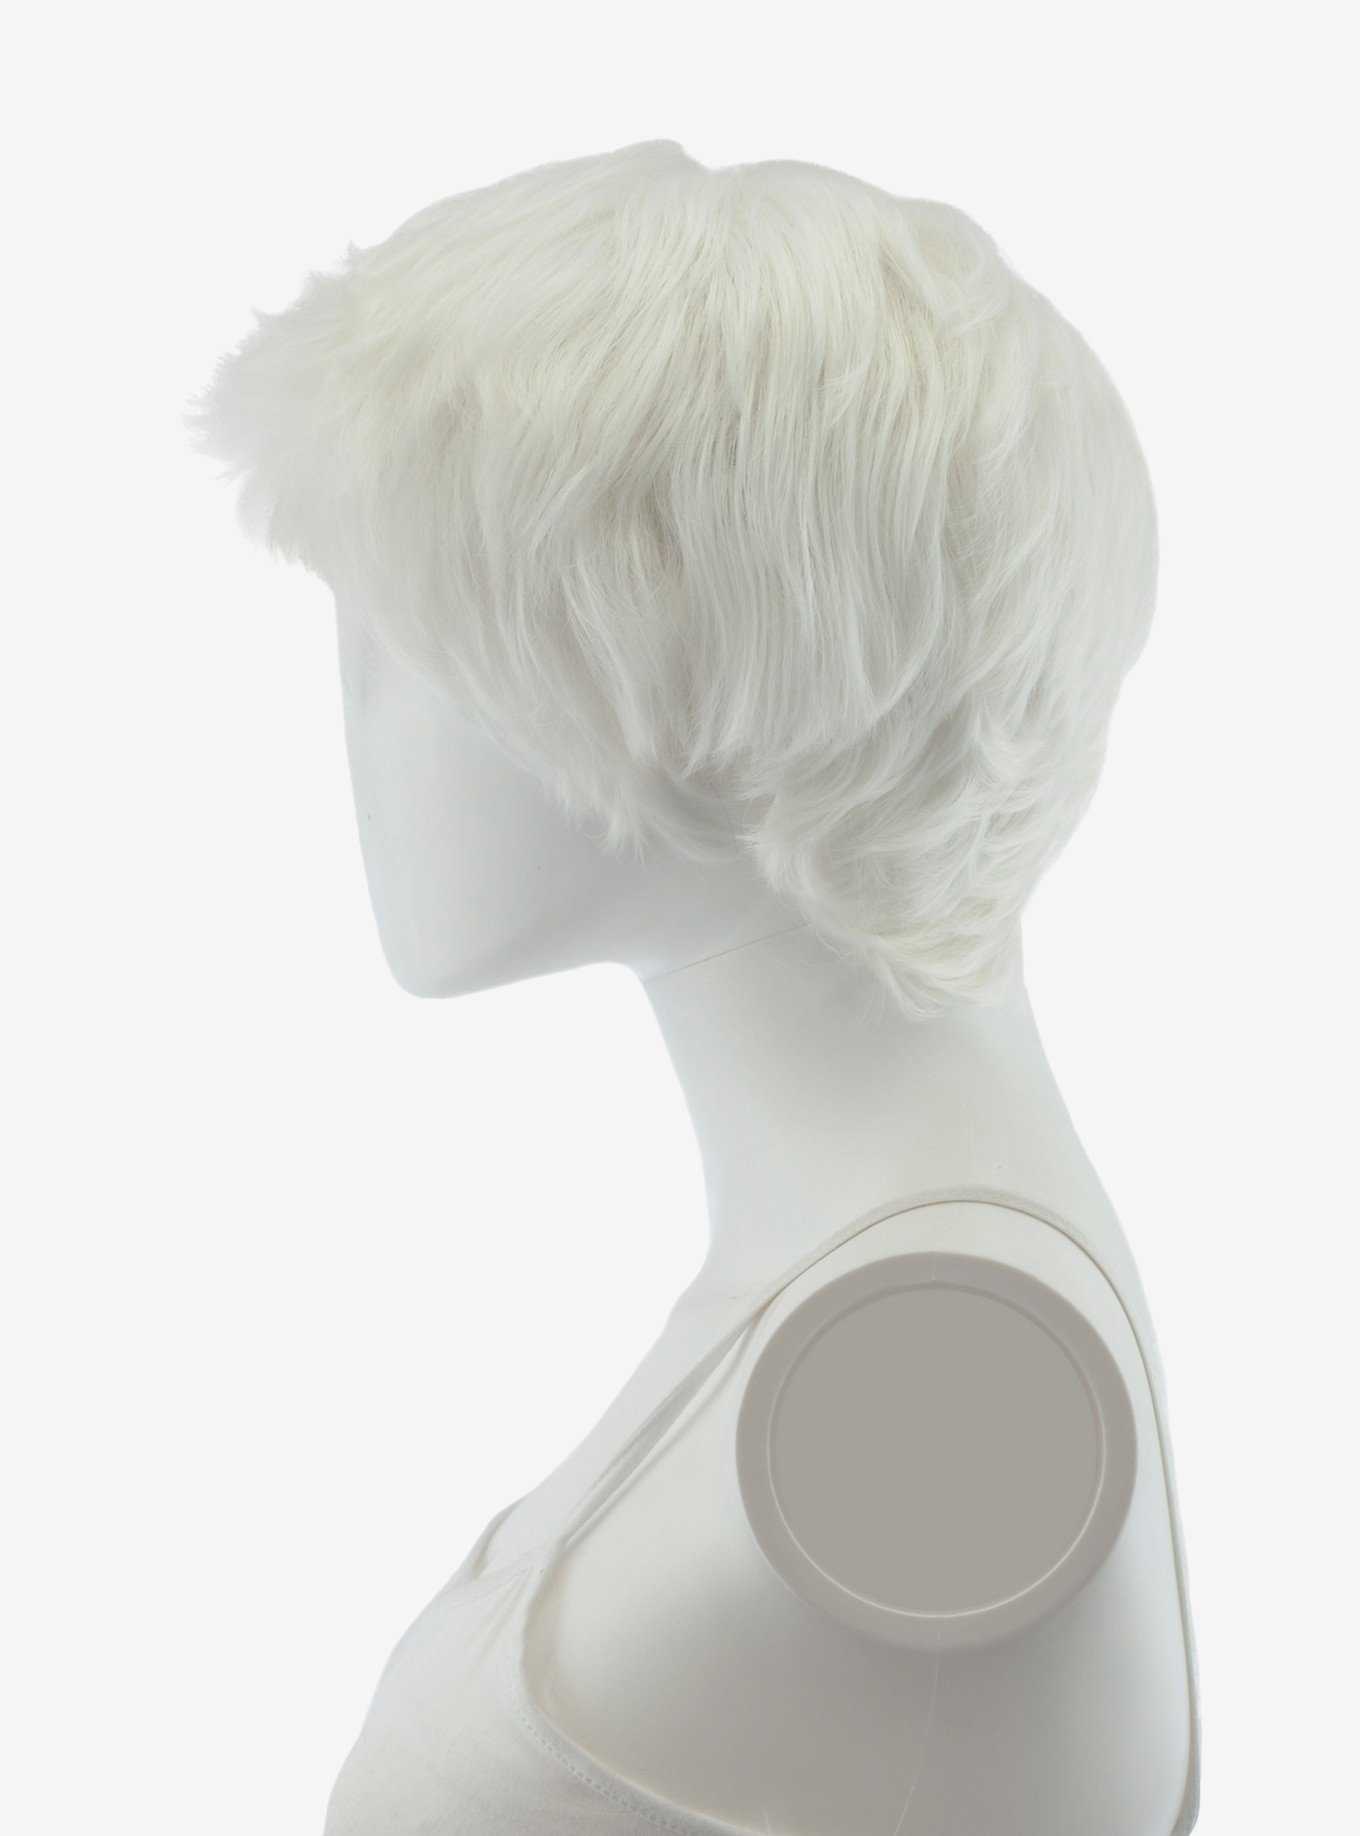 Epic Cosplay Hermes Classic White Pixie Hair Wig, , hi-res